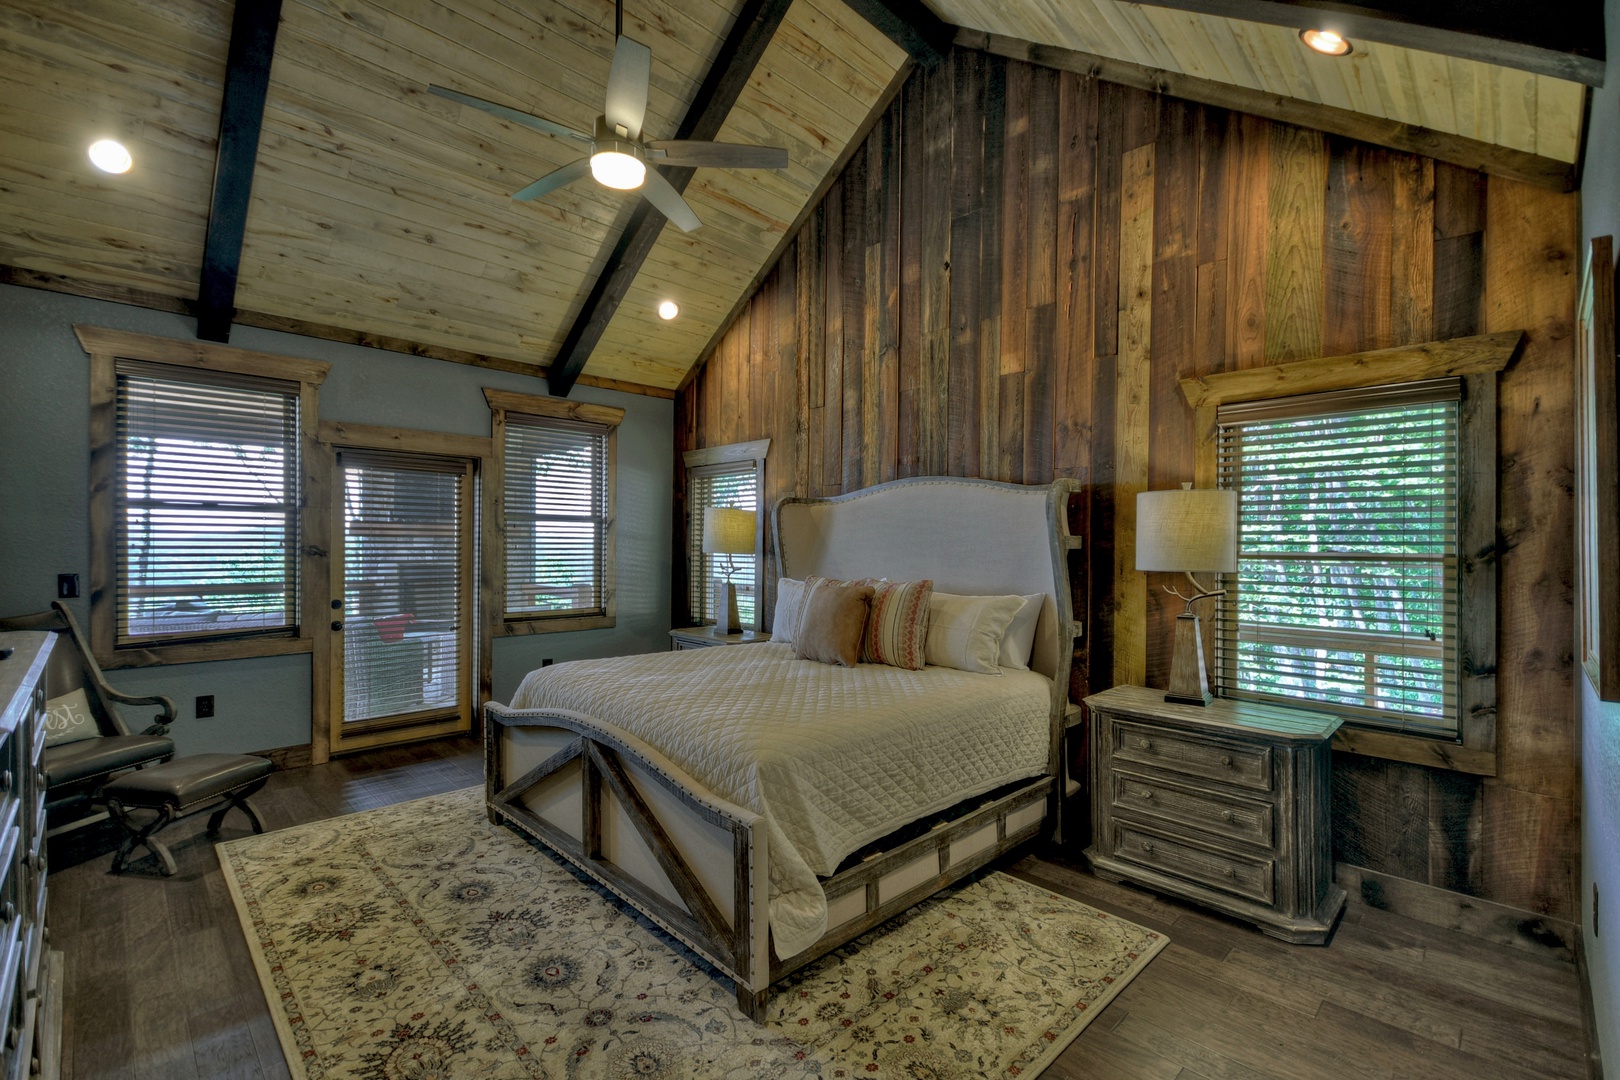 New Heights- Main level king master bedroom with rustic furnishings